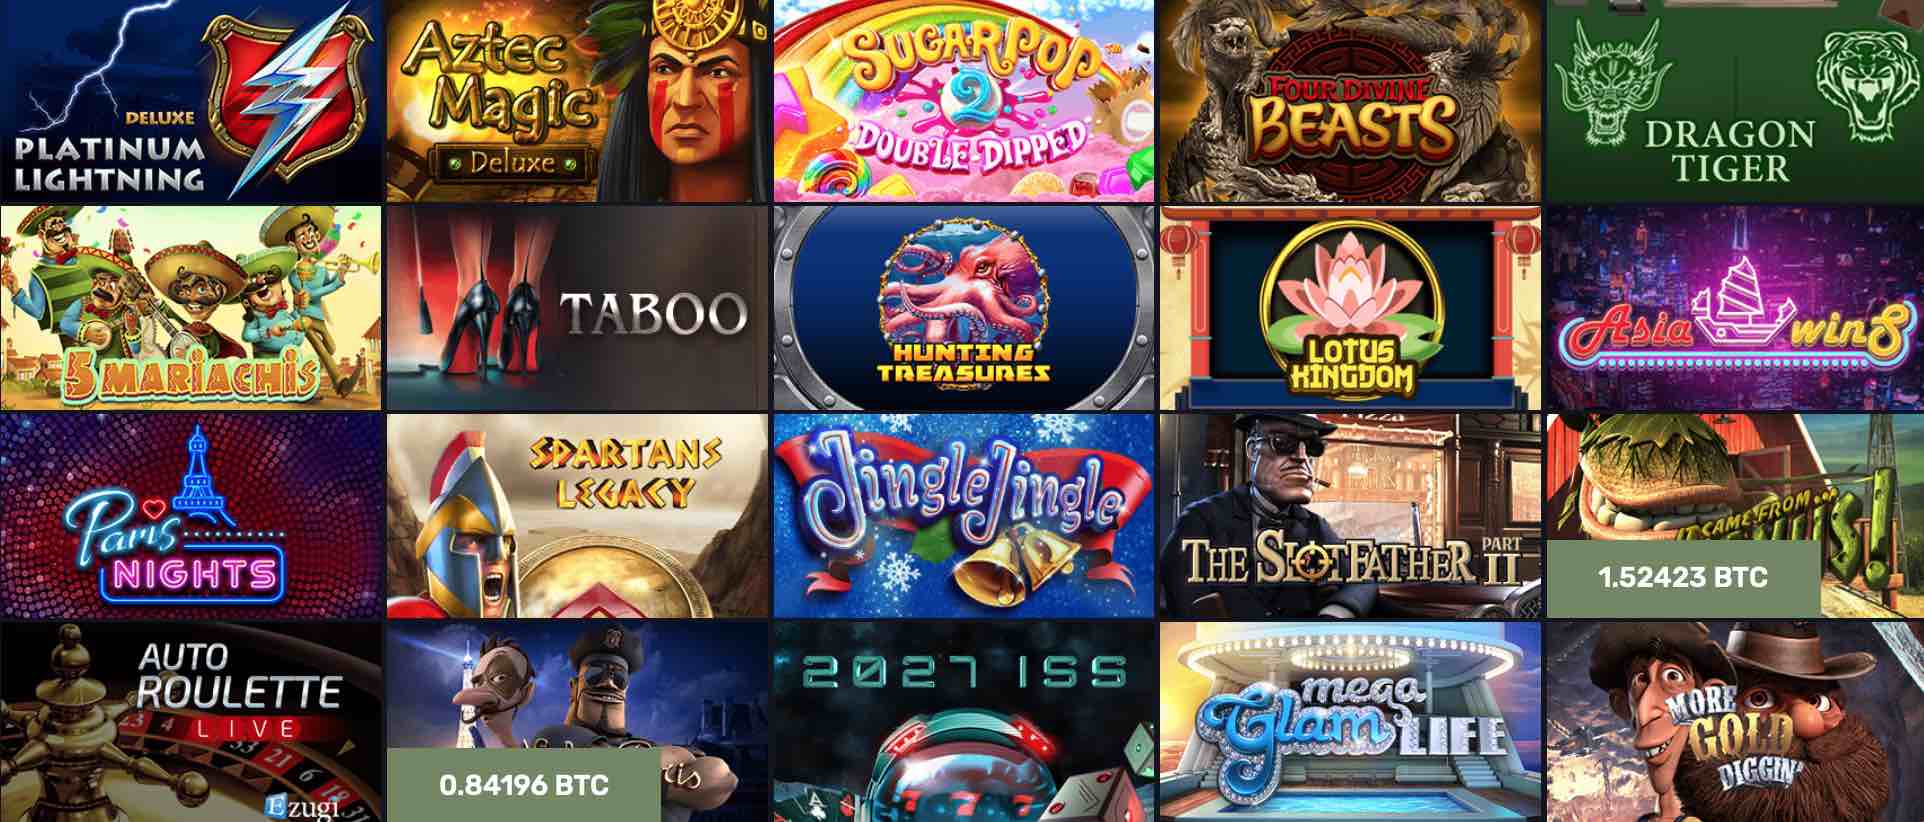 Mobile millions casino review